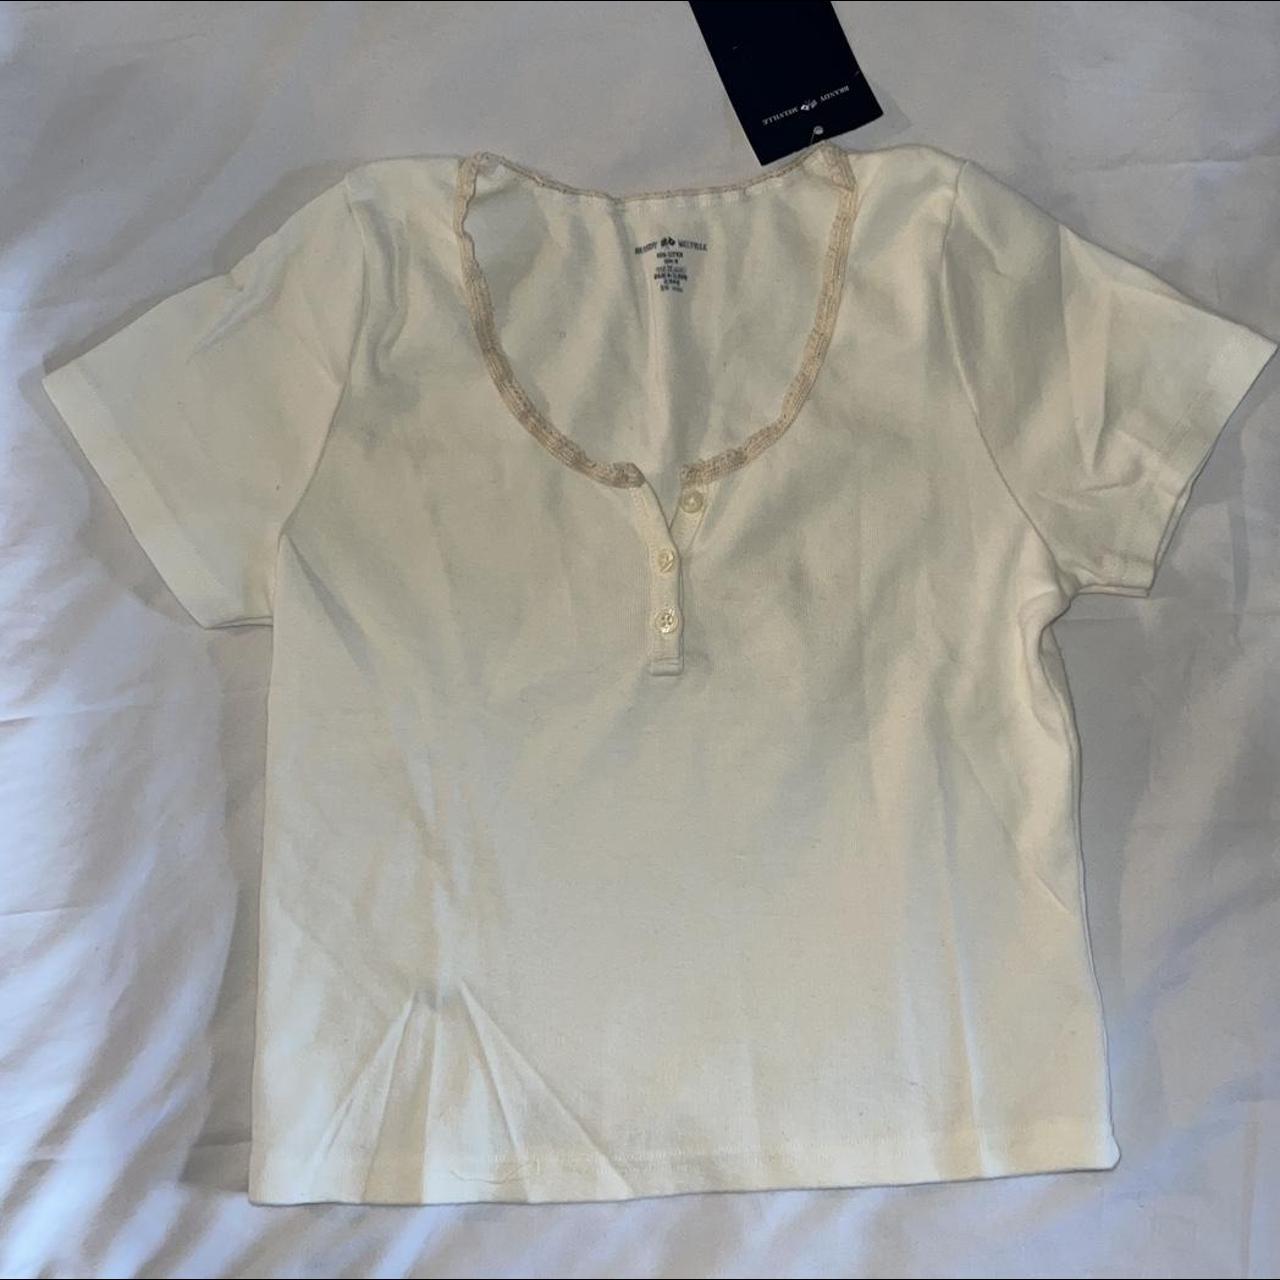 Brandy Melville zelly lace trim top nwt. Price firm.